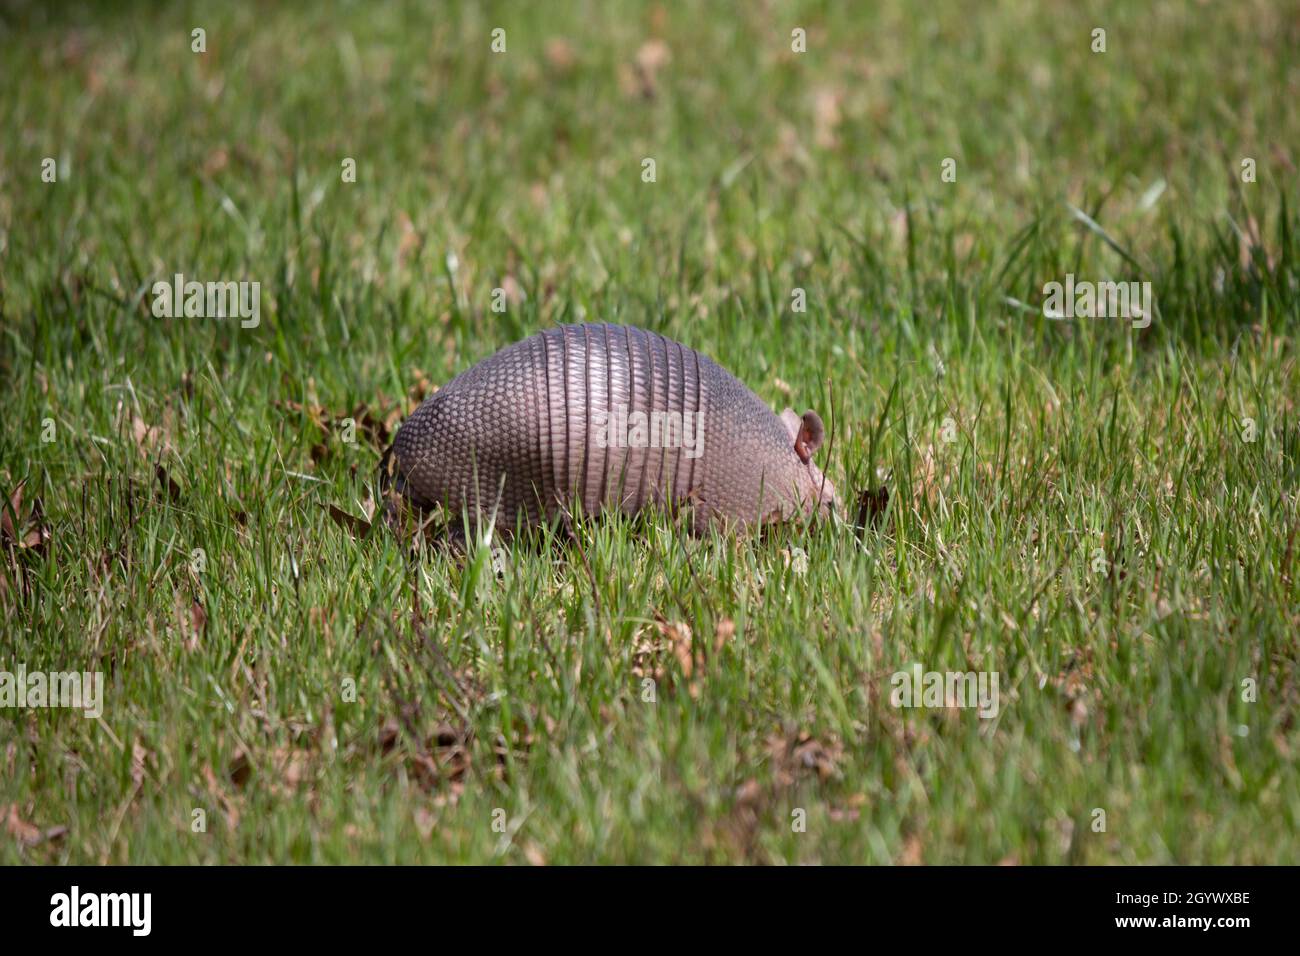 Nine-banded armadillo (Dasypus novemcinctus) foraging for insects in green grass in an open field Stock Photo